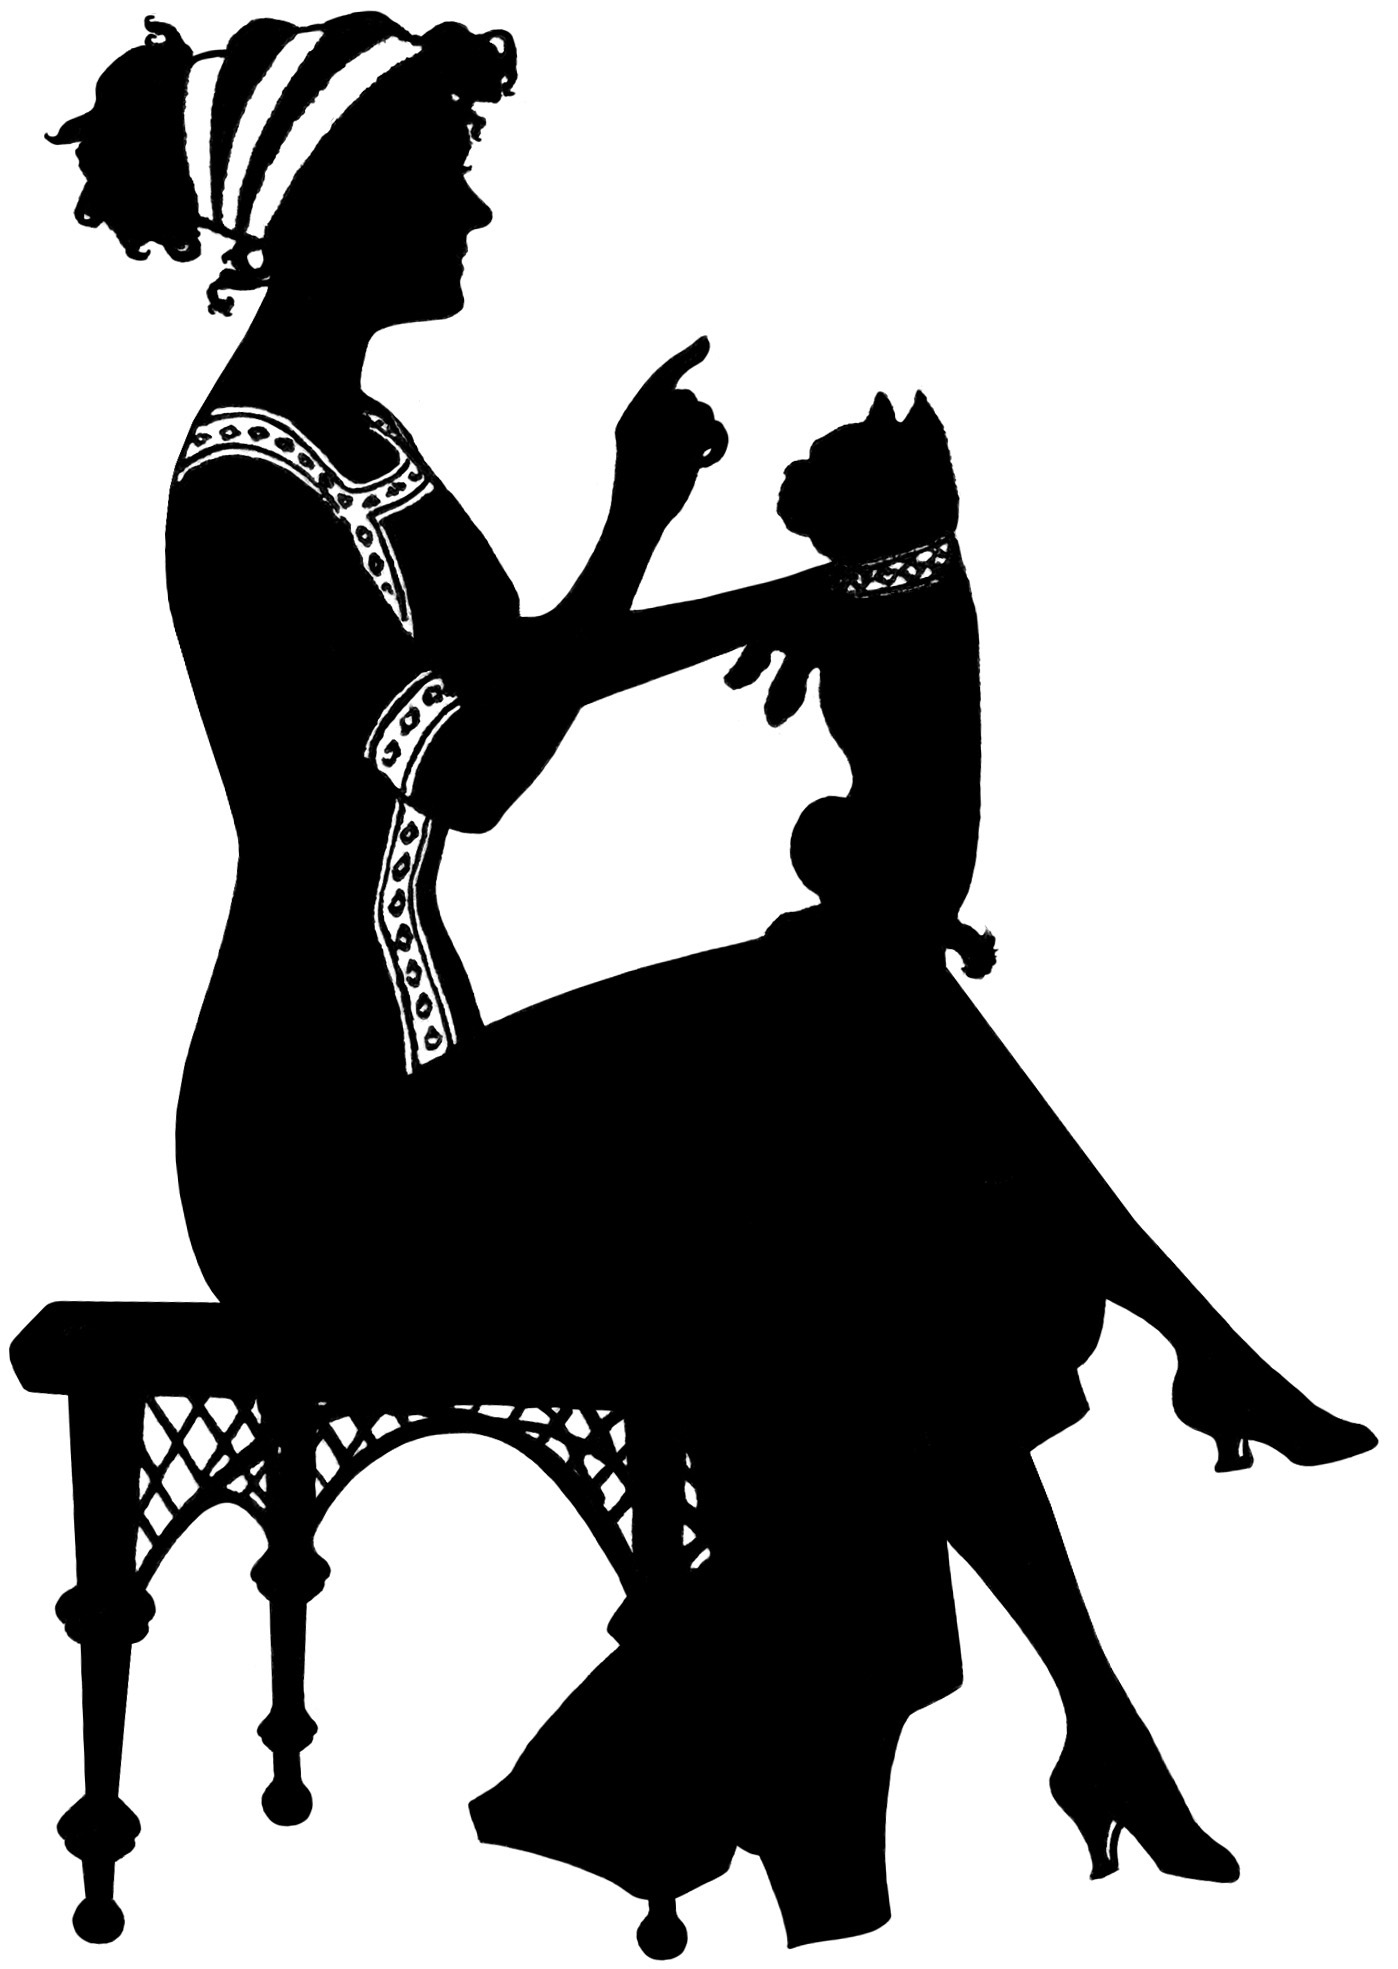 This Lovely Vintage Silhouette Of A Lady Sitting On A Bench Balancing